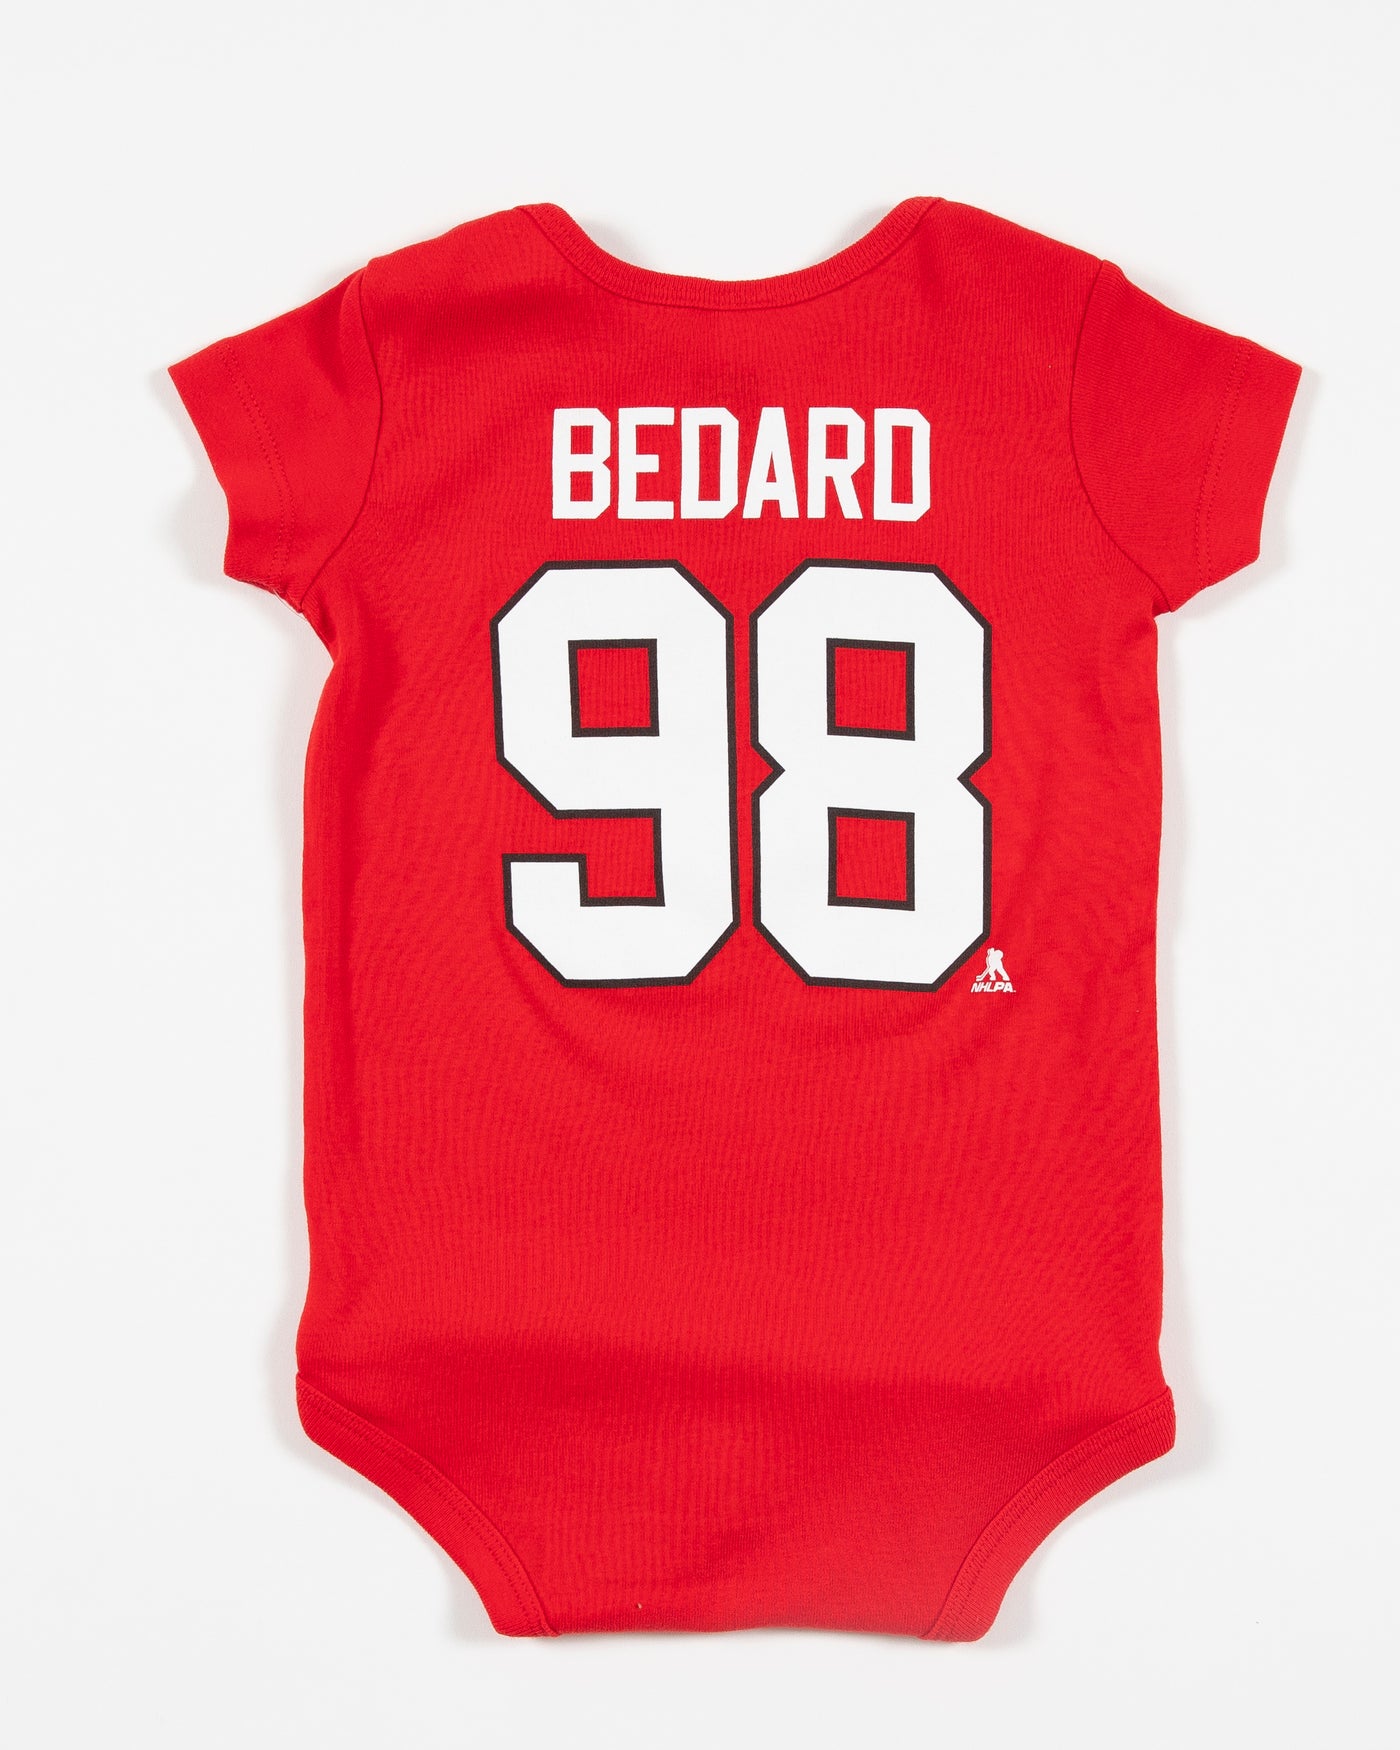 Red Outerstuff Chicago Blackhawks onesie with Bedard 98 on back and primary logo across front - back lay flat